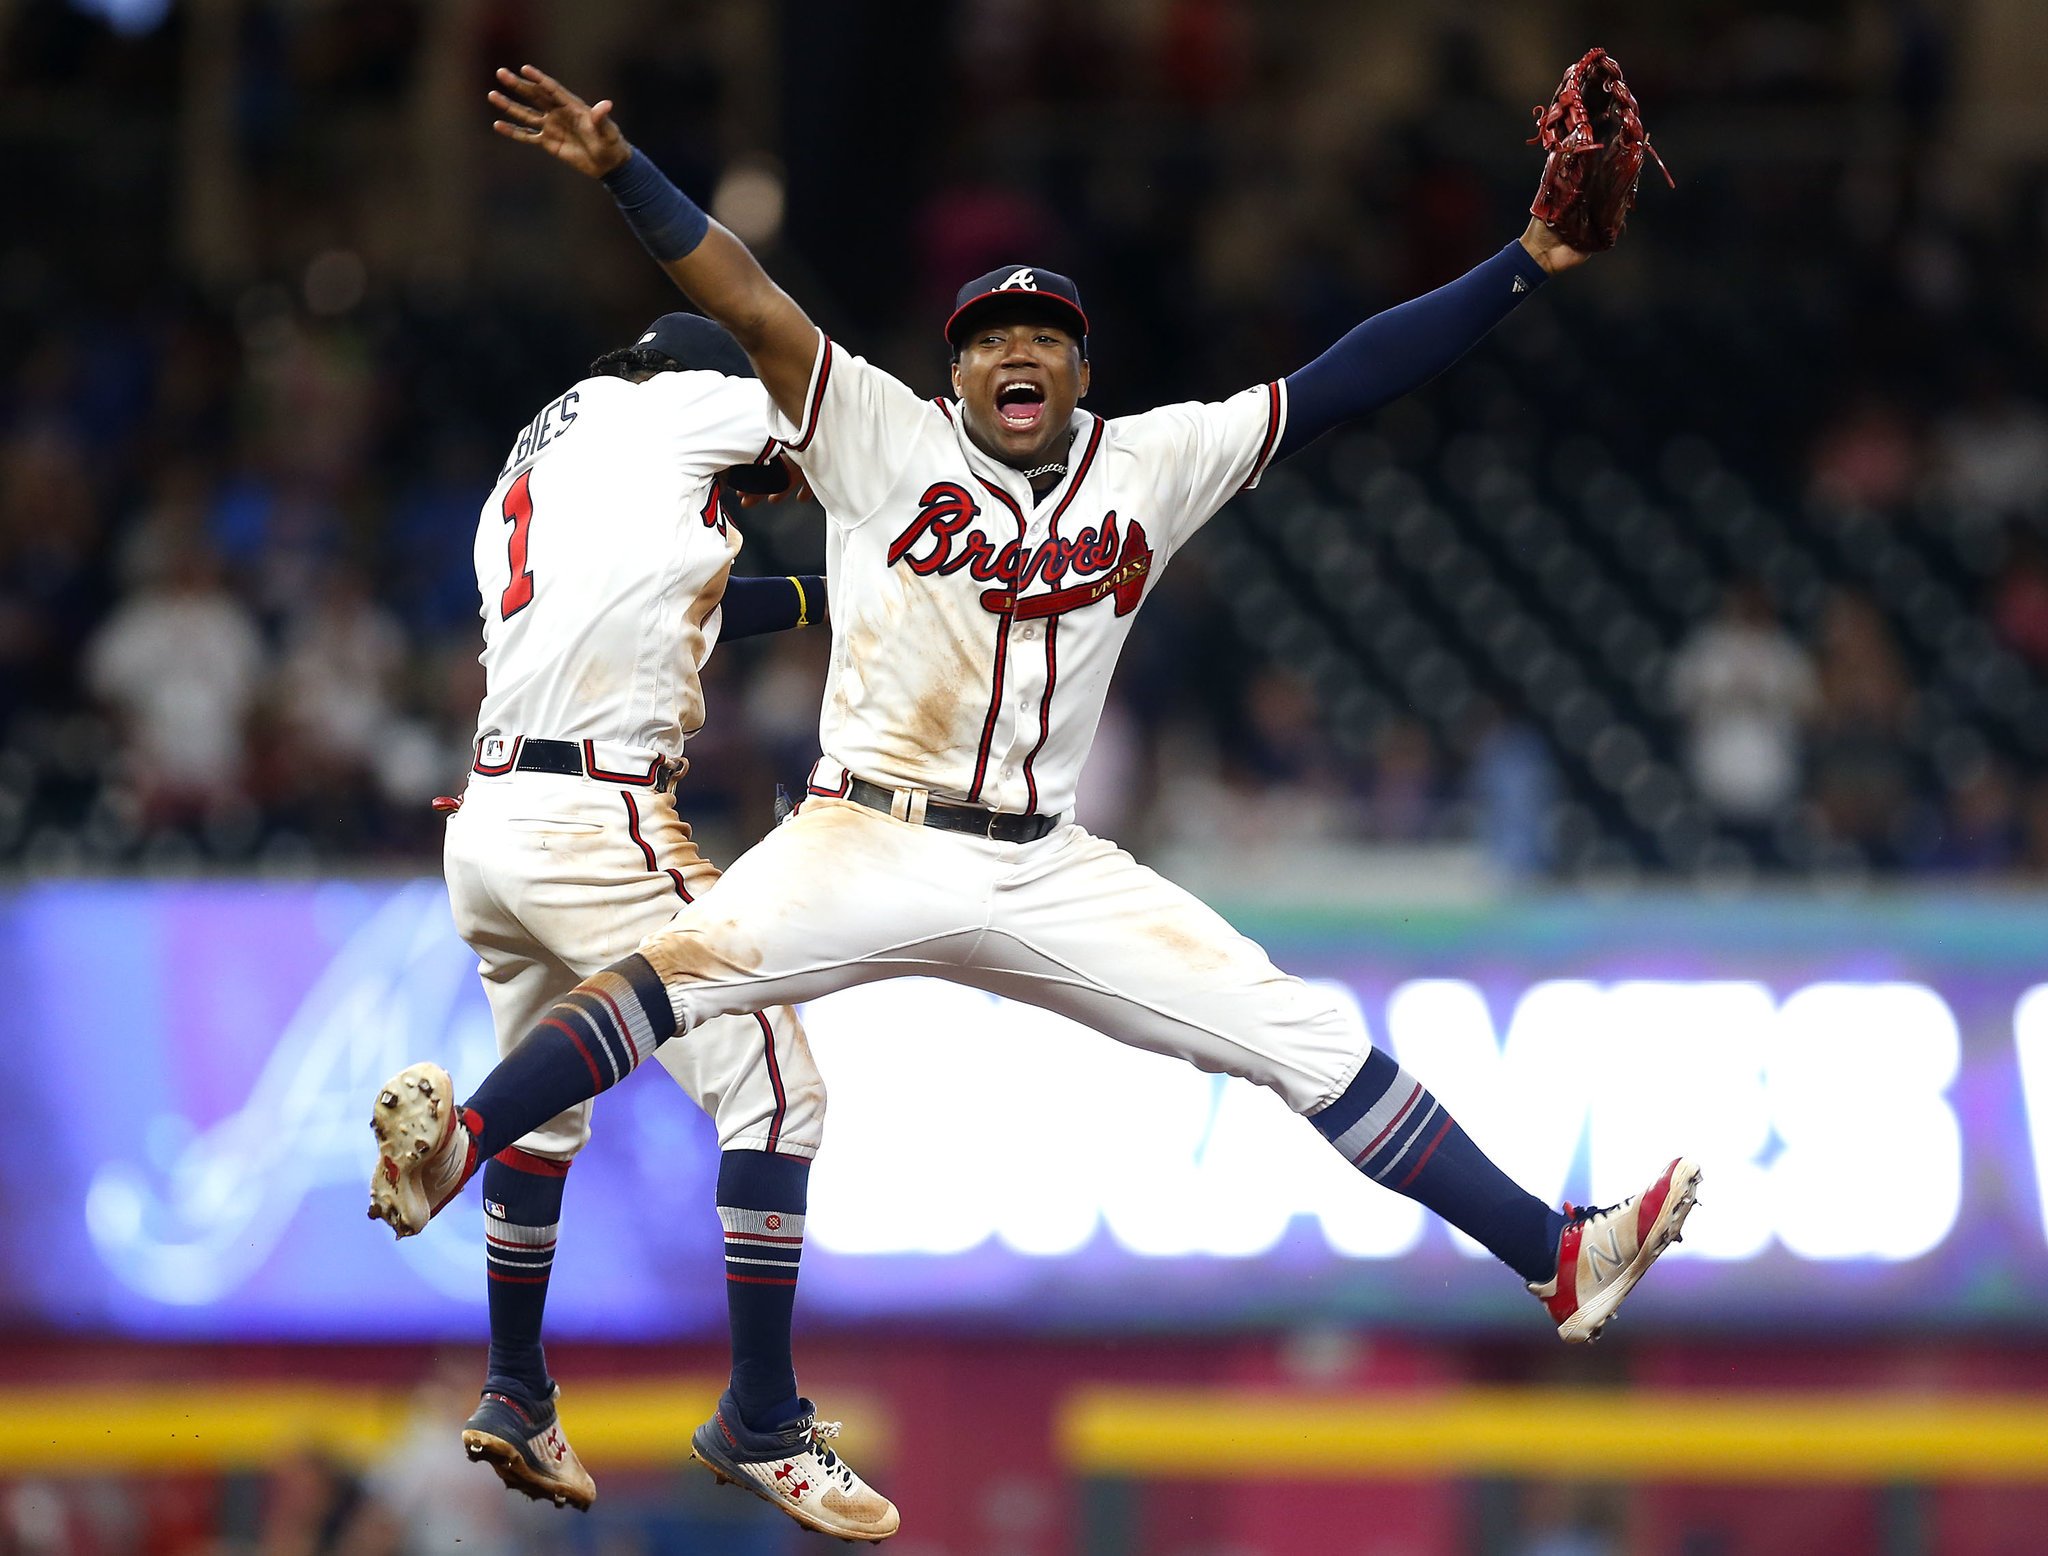 After the Braves Let the Kid Play, Ronald Acuña Jr. Soared